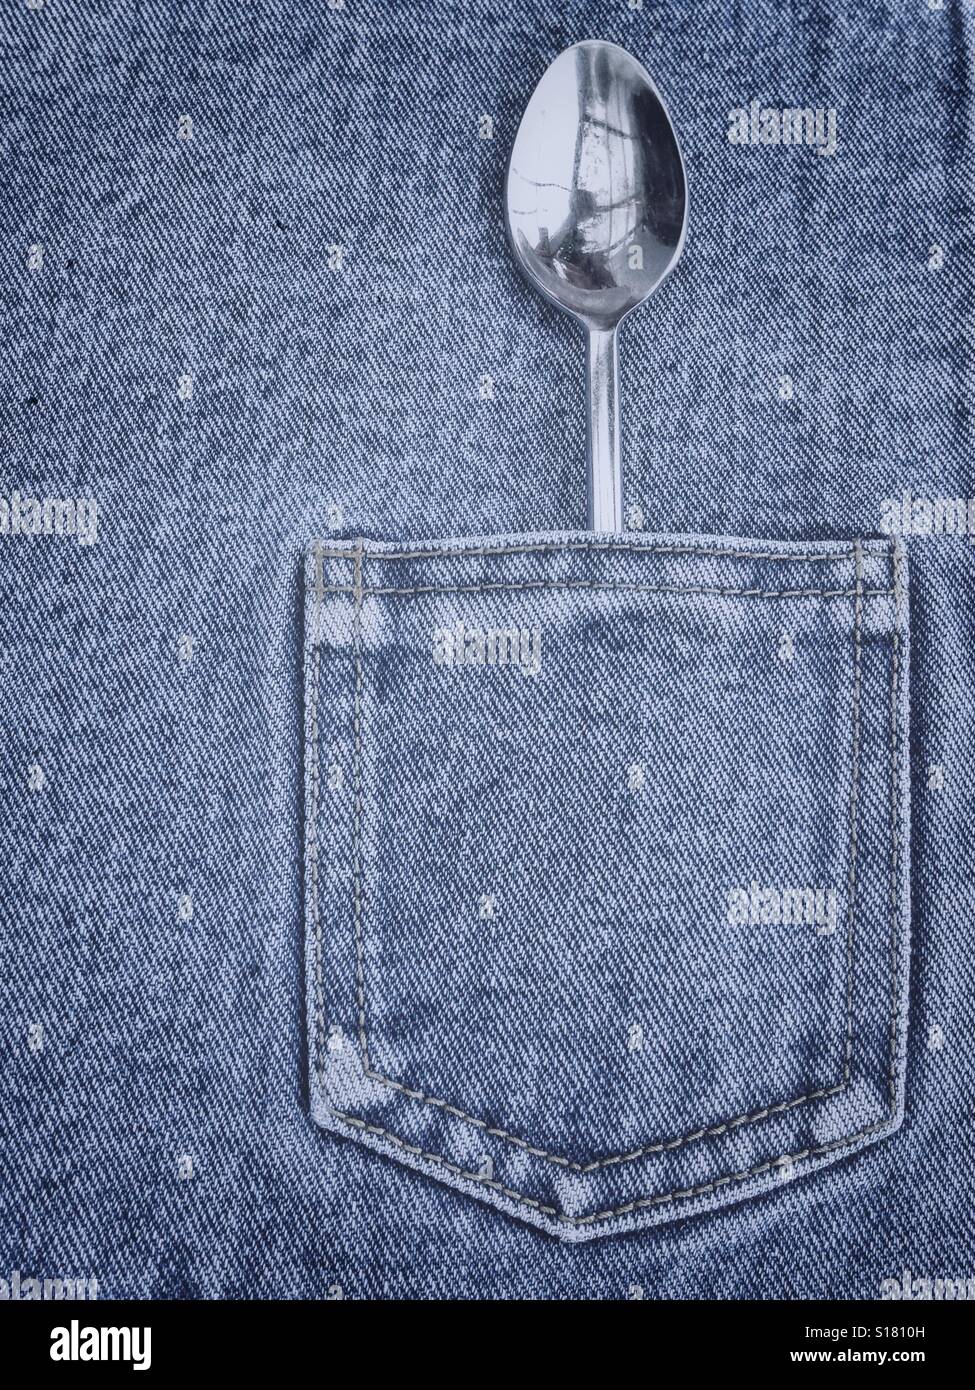 A spoon in a pocket of jeans tablecloth Stock Photo - Alamy